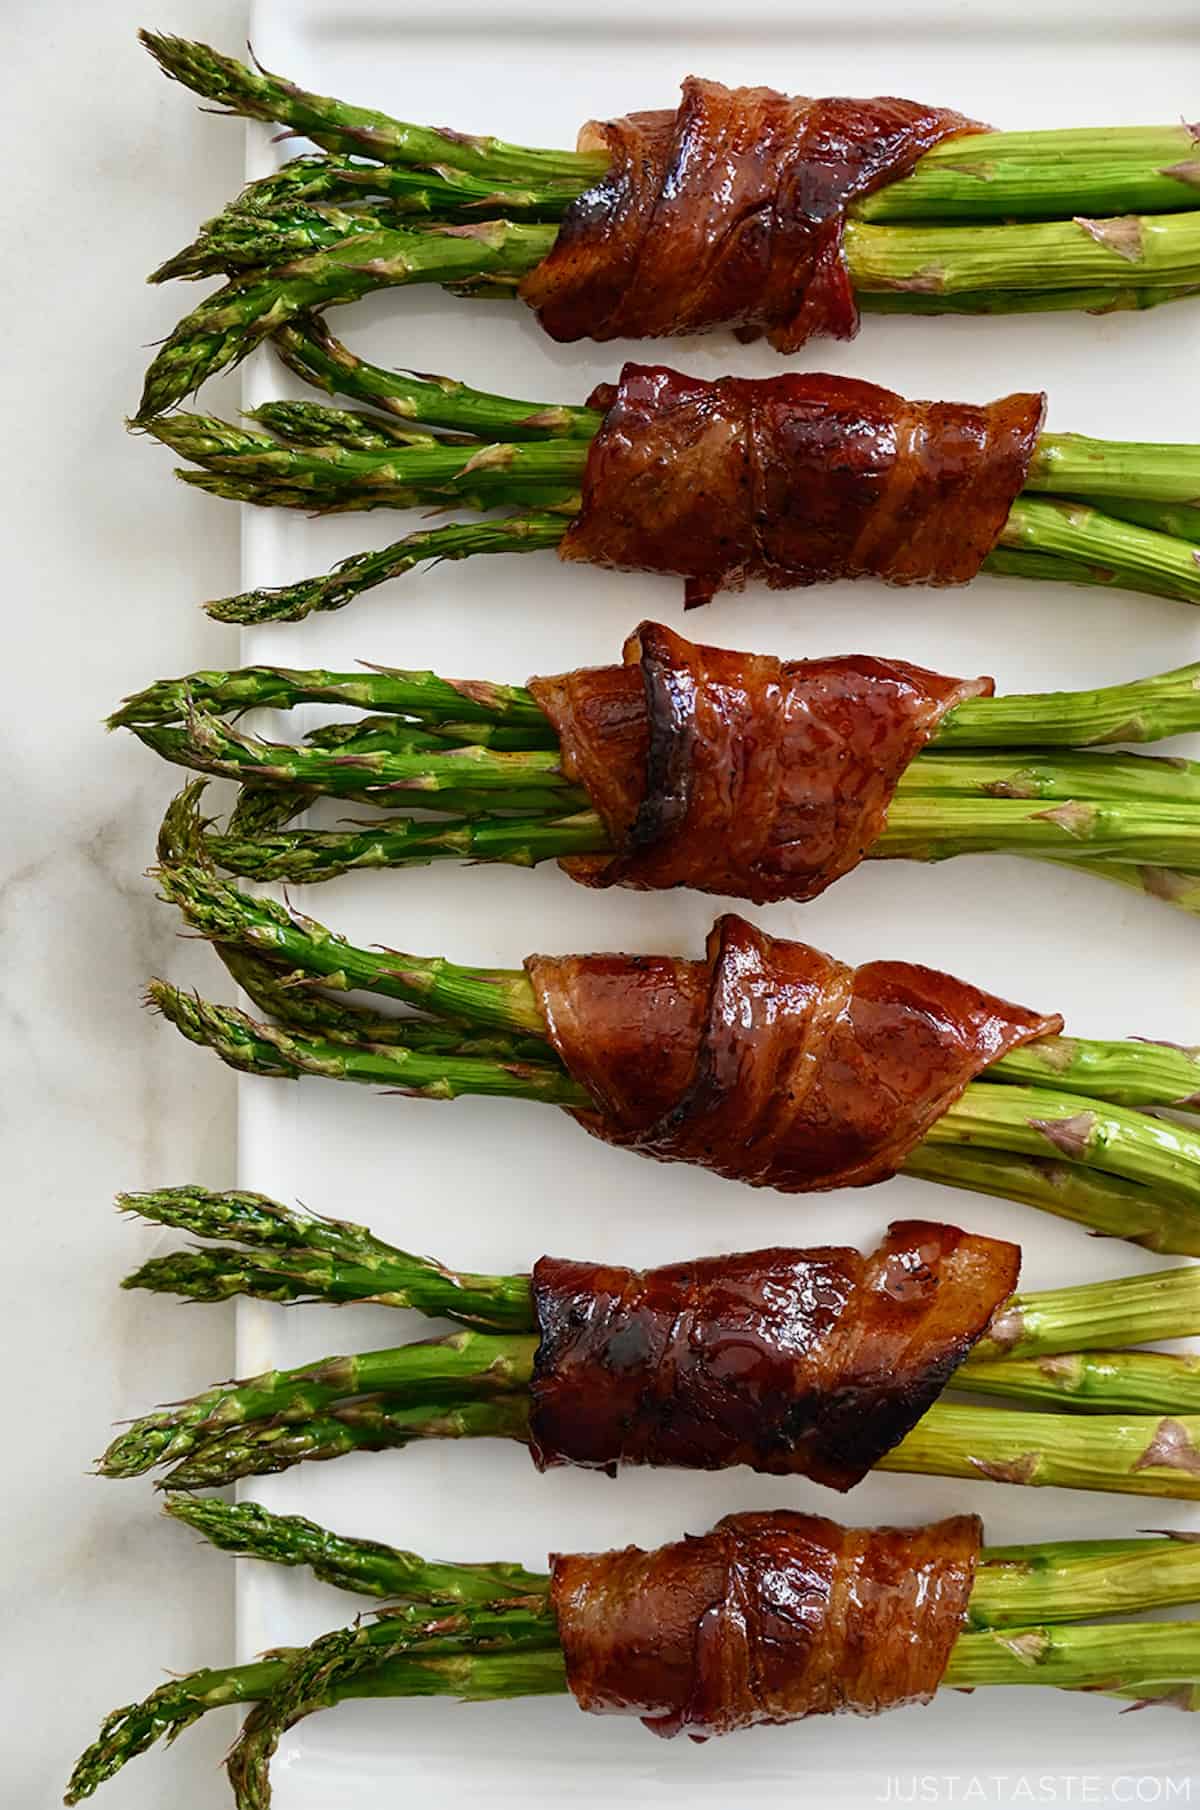 Six cooked bacon-wrapped asparagus bundles on a white platter.